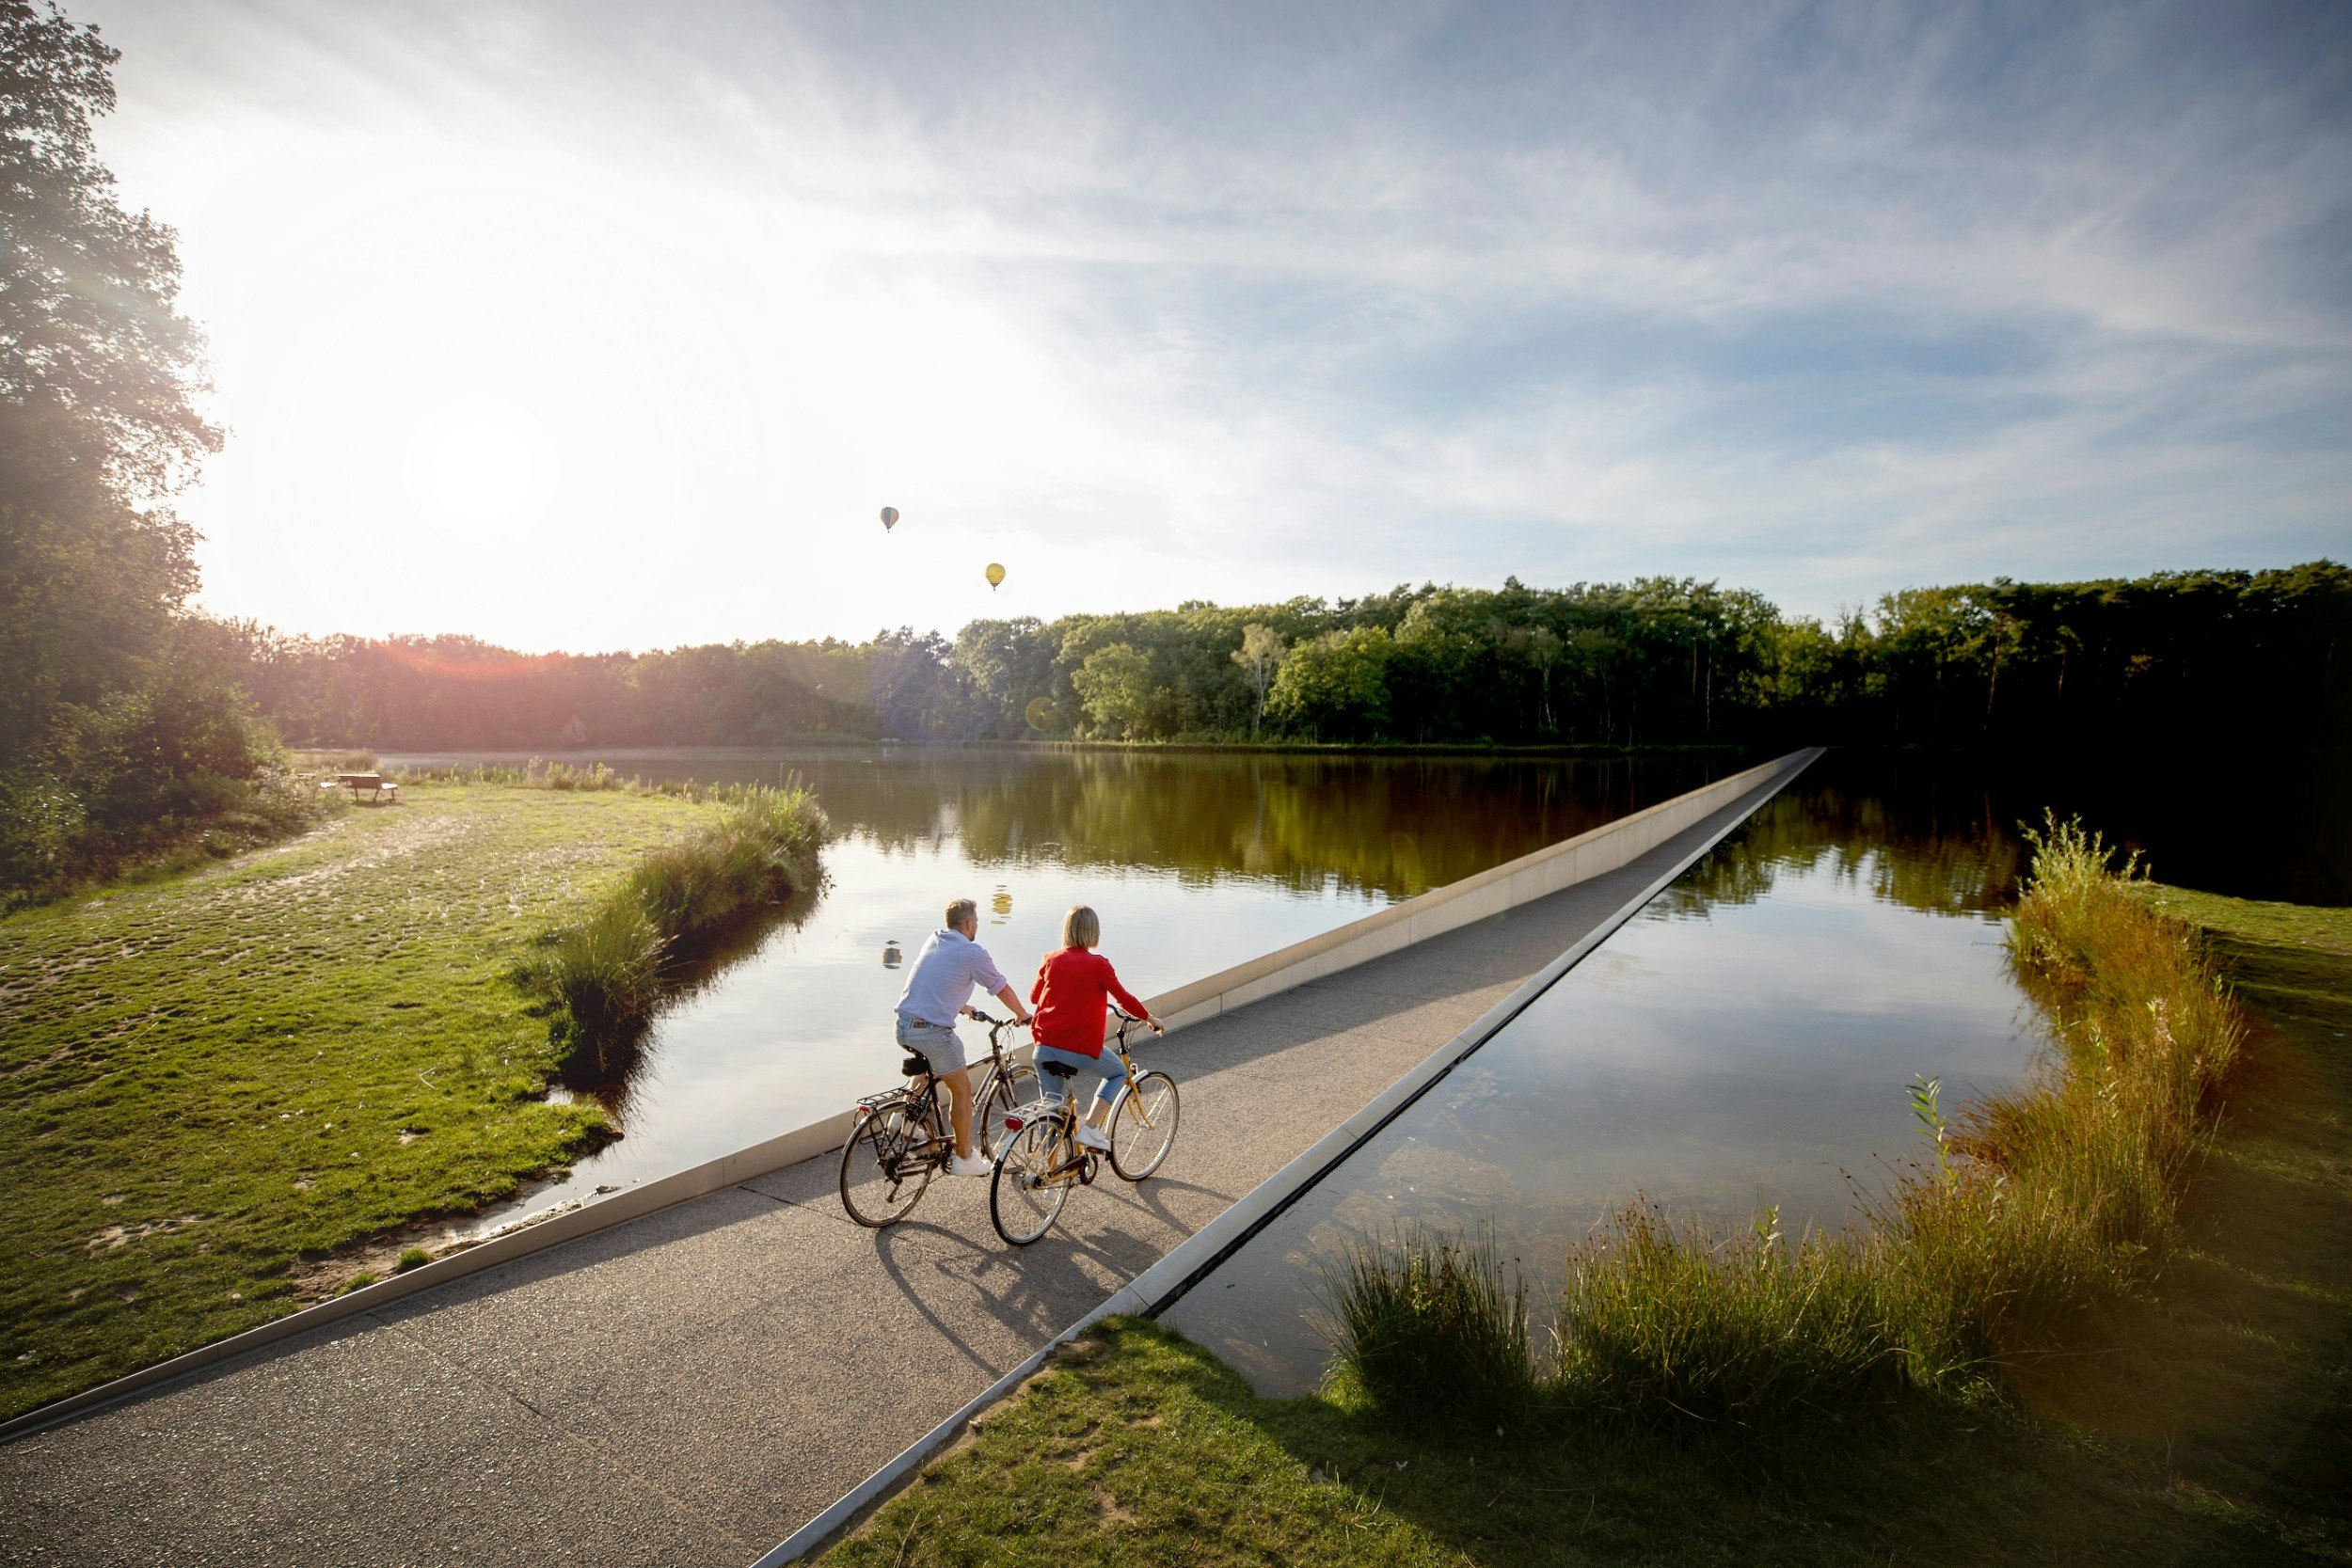 Two people cycling on a path through a pond